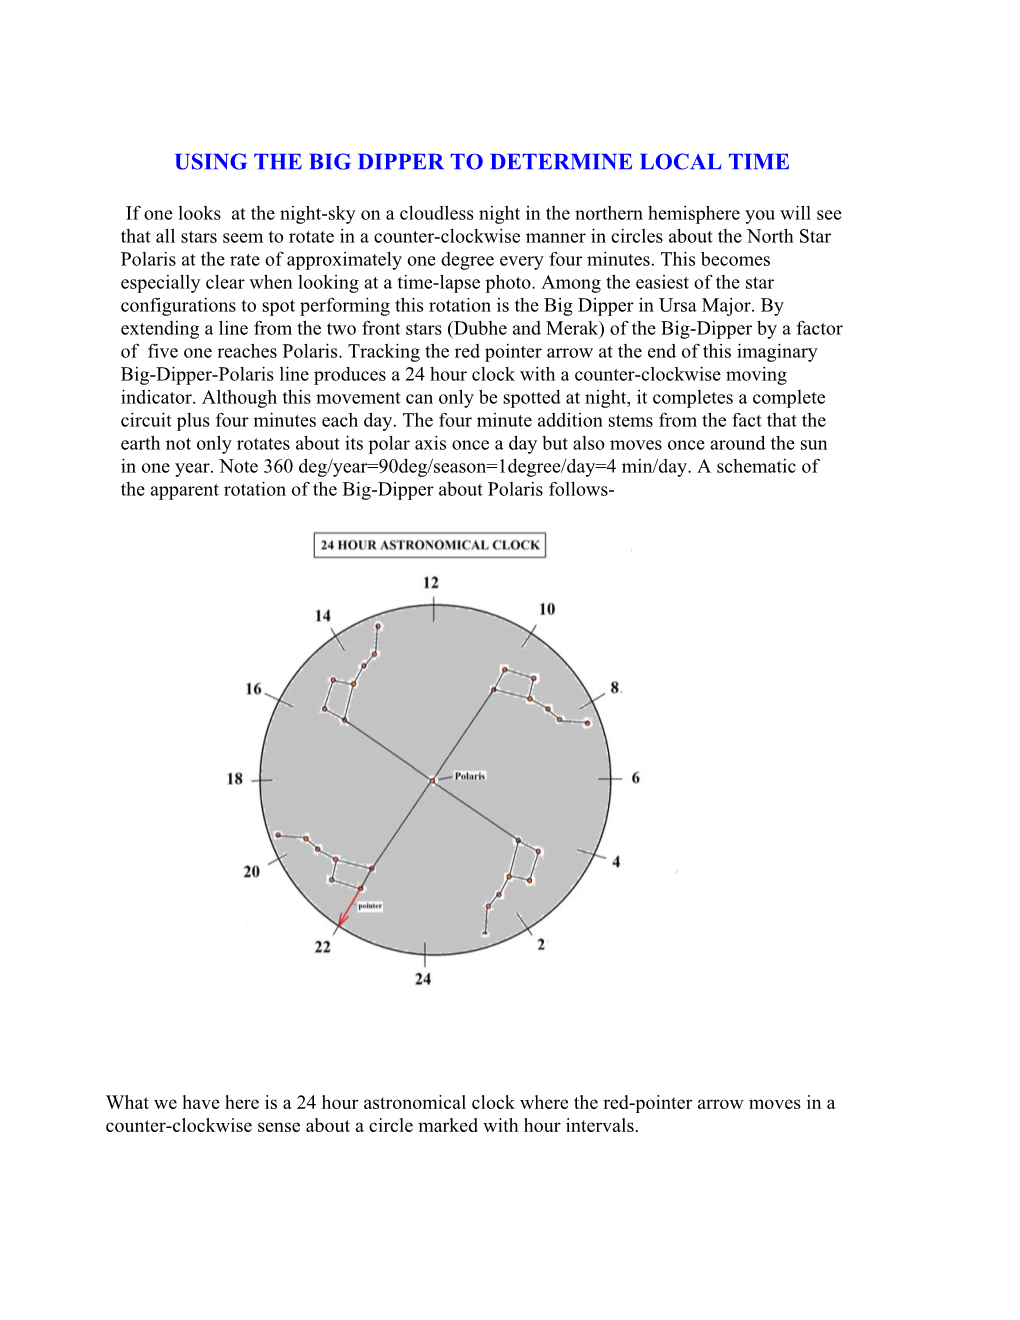 Using the Big Dipper to Determine Local Time